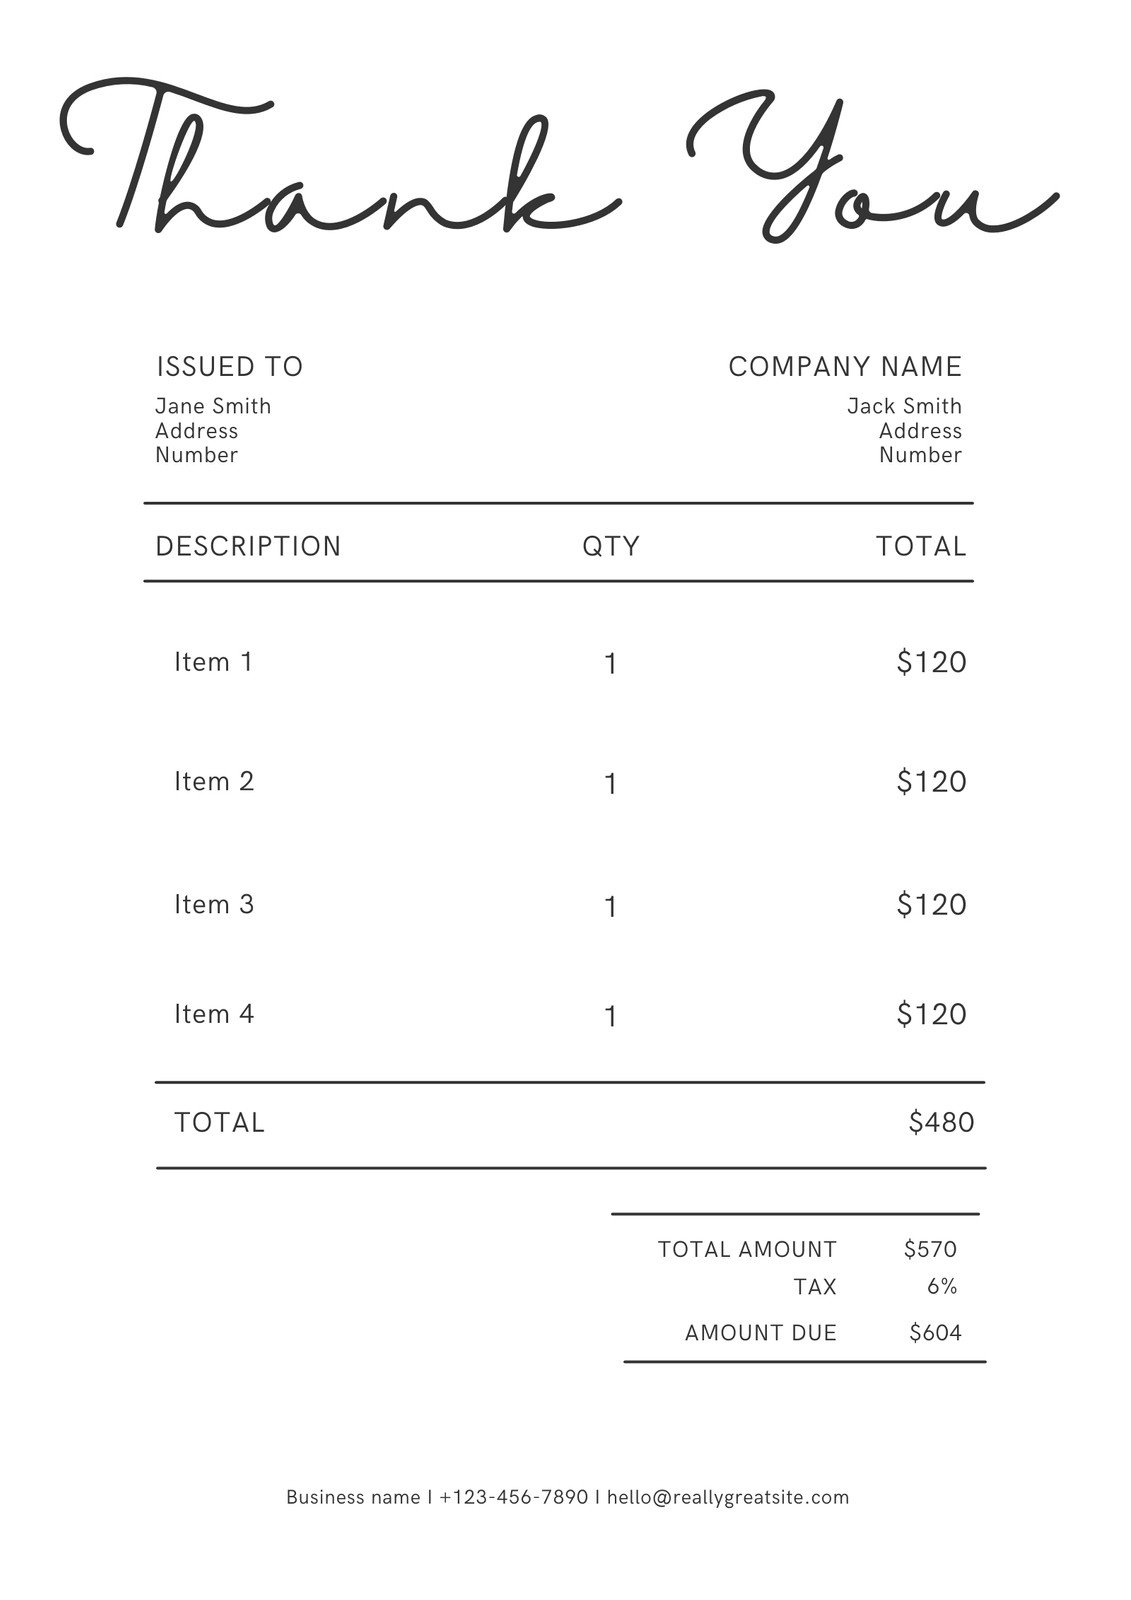 Download Invoice Template Limited Company Pictures